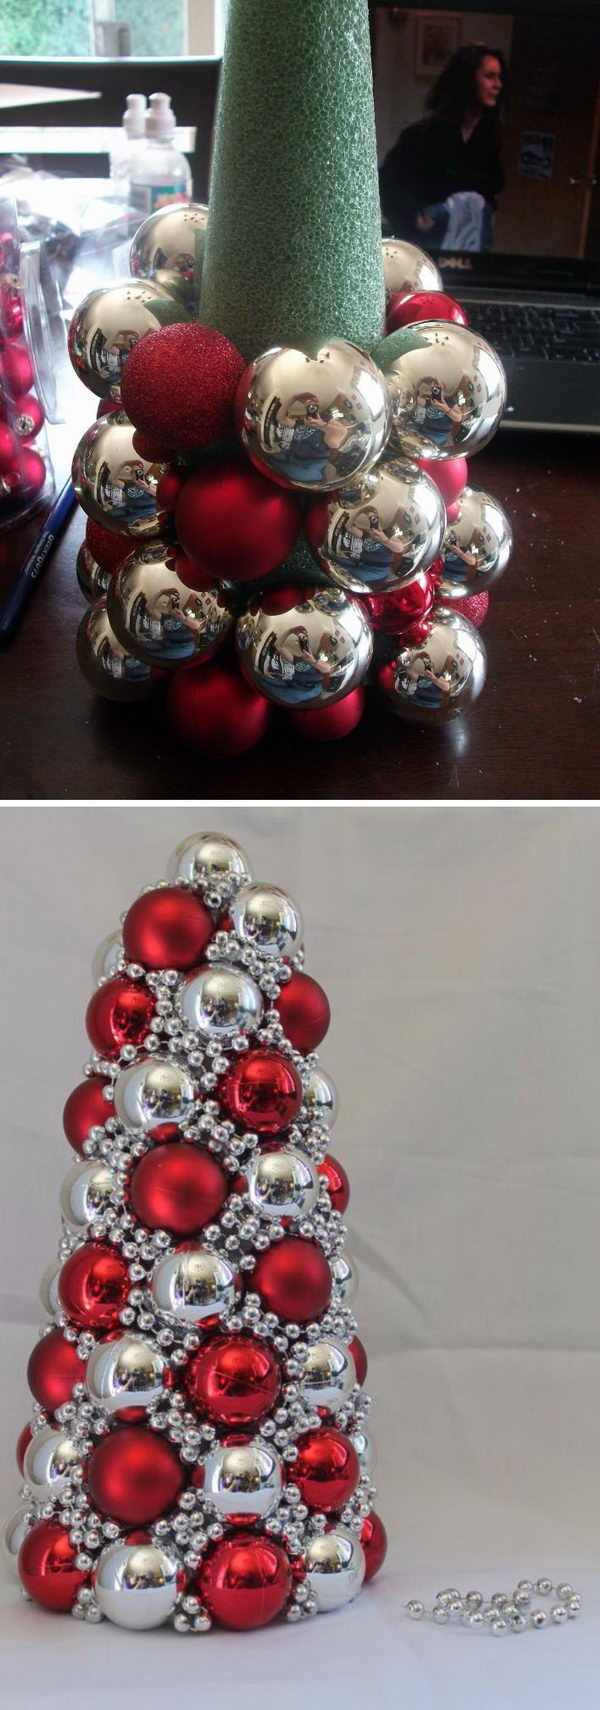 DIY Christmas Ornaments Pinterest
 20 Great Ways To Decorate Your Home With Christmas Ornaments